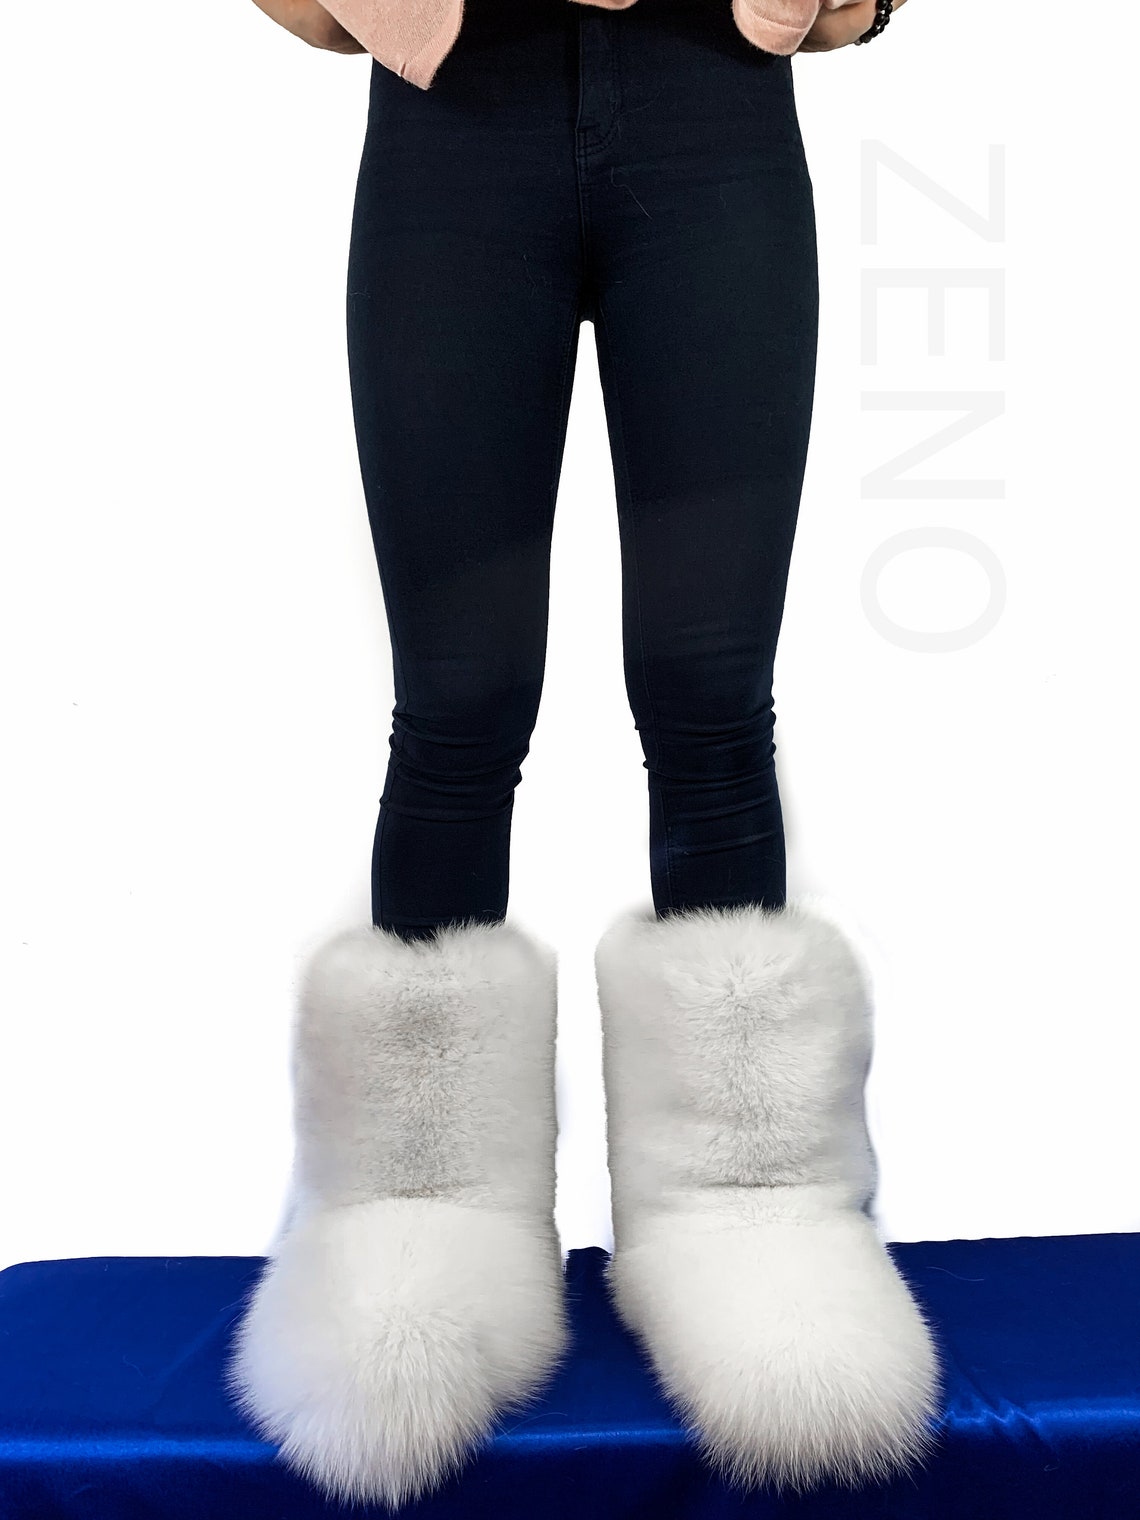 Double-sided Arctic Fox Fur Boots for Outdoor Arctic Boots - Etsy